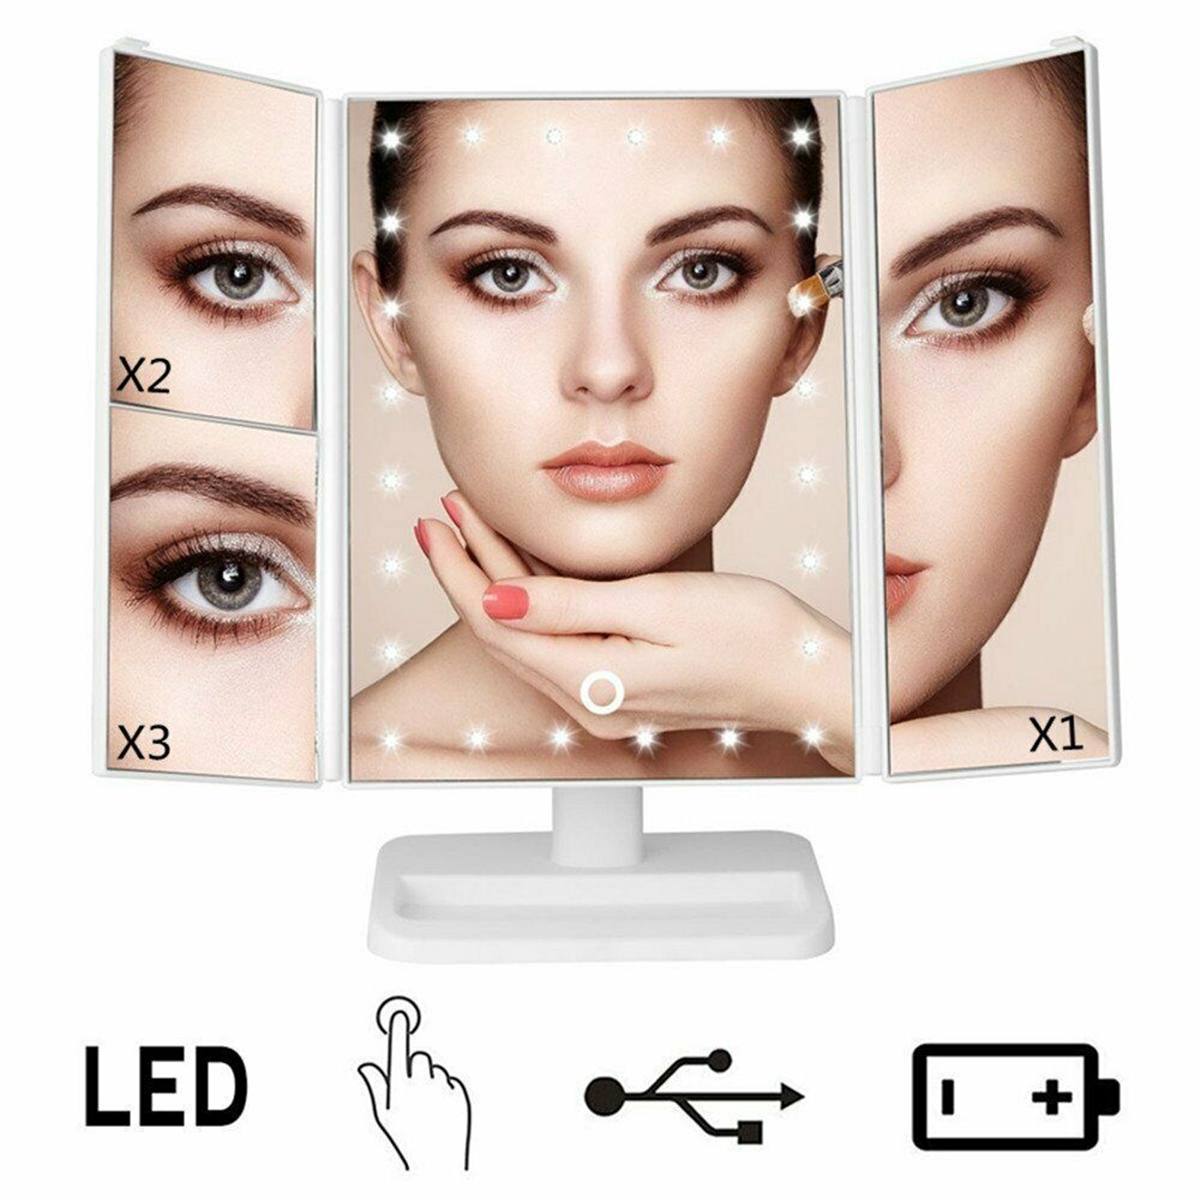 22LED-Tri-Fold-Touch-Screen-Makeup-Mirror-Table-Cosmetic-Vanity-Light-Mirror-1943281-8